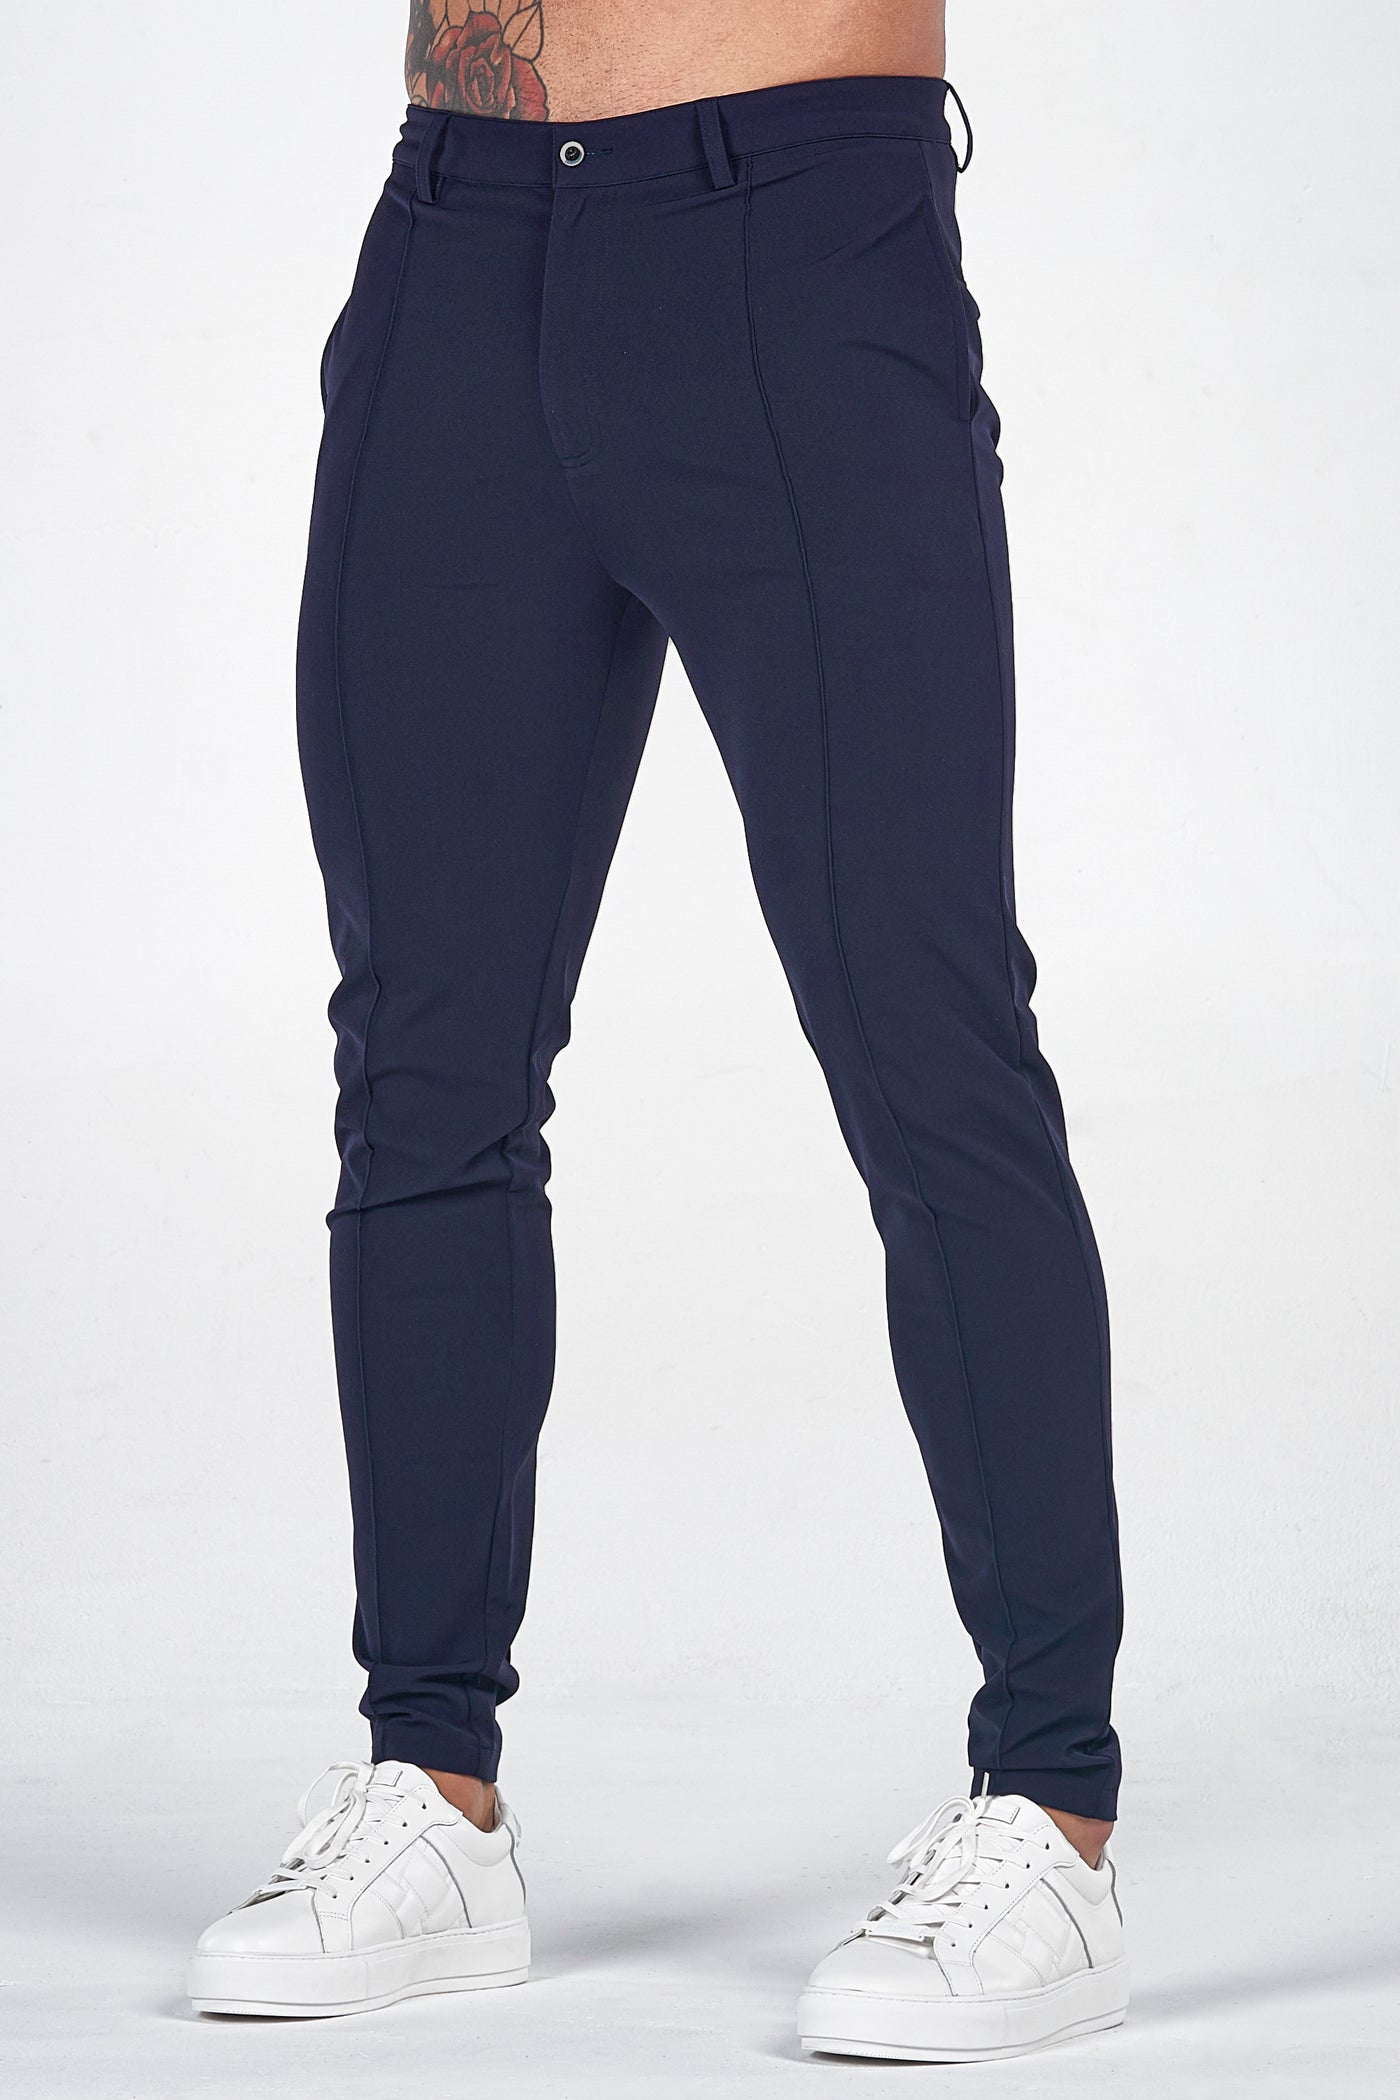 THE VOCO TROUSERS 2.0 - NAVY BLUE - ICON. AMSTERDAM